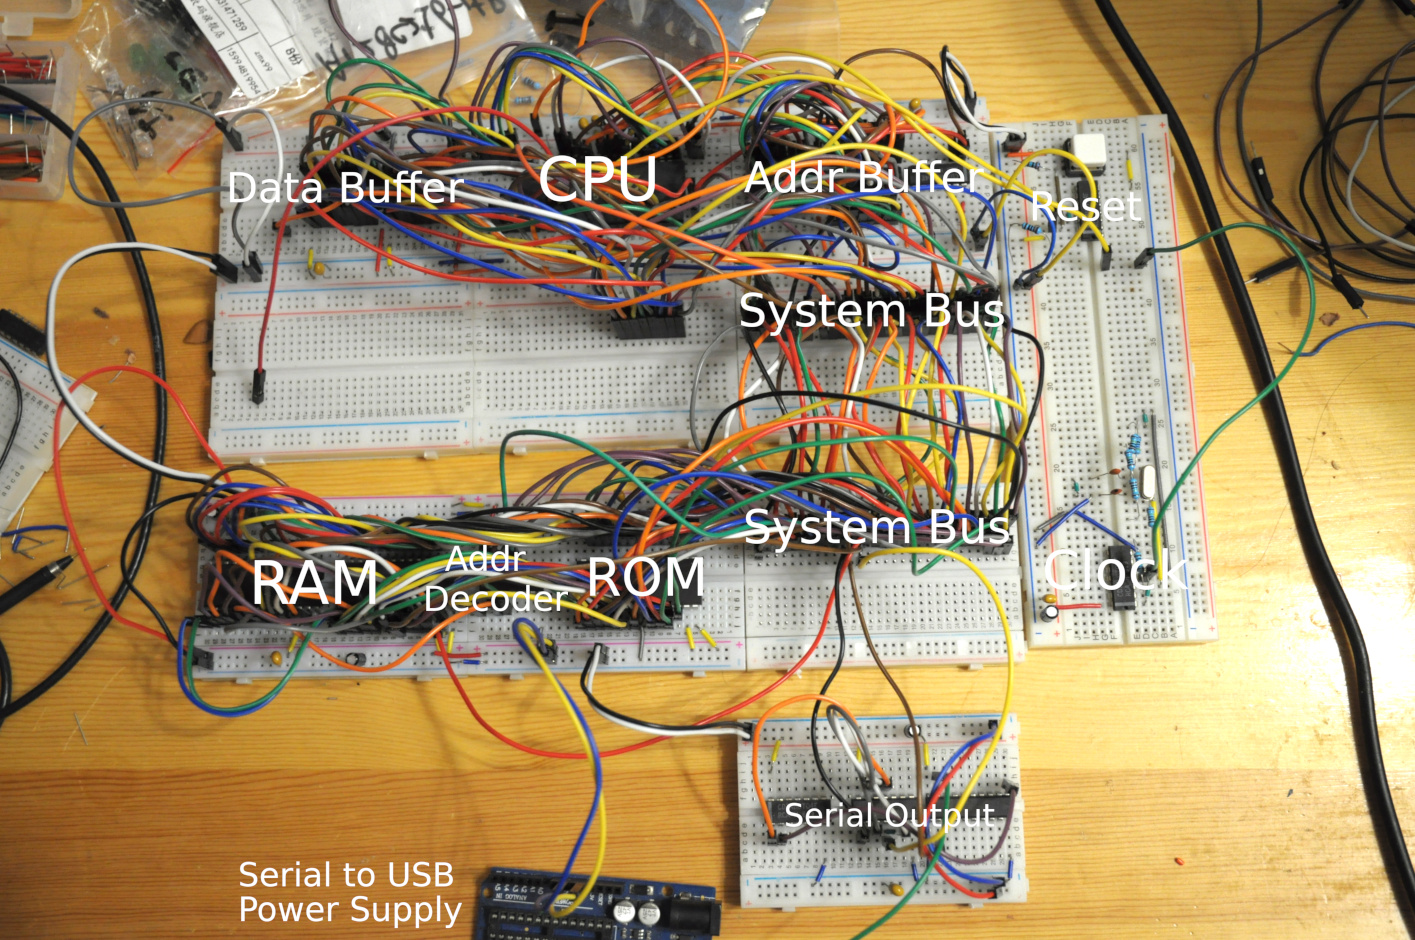 Breadboard Zilog Z80 computer: A huge array of breadboards and horrifying jumpers everywhere, with labels that read “data buffer”, “CPU”, “address buffer”, “system bus”, “RAM”, “ROM”, “serial output”, “clock” and “reset”.